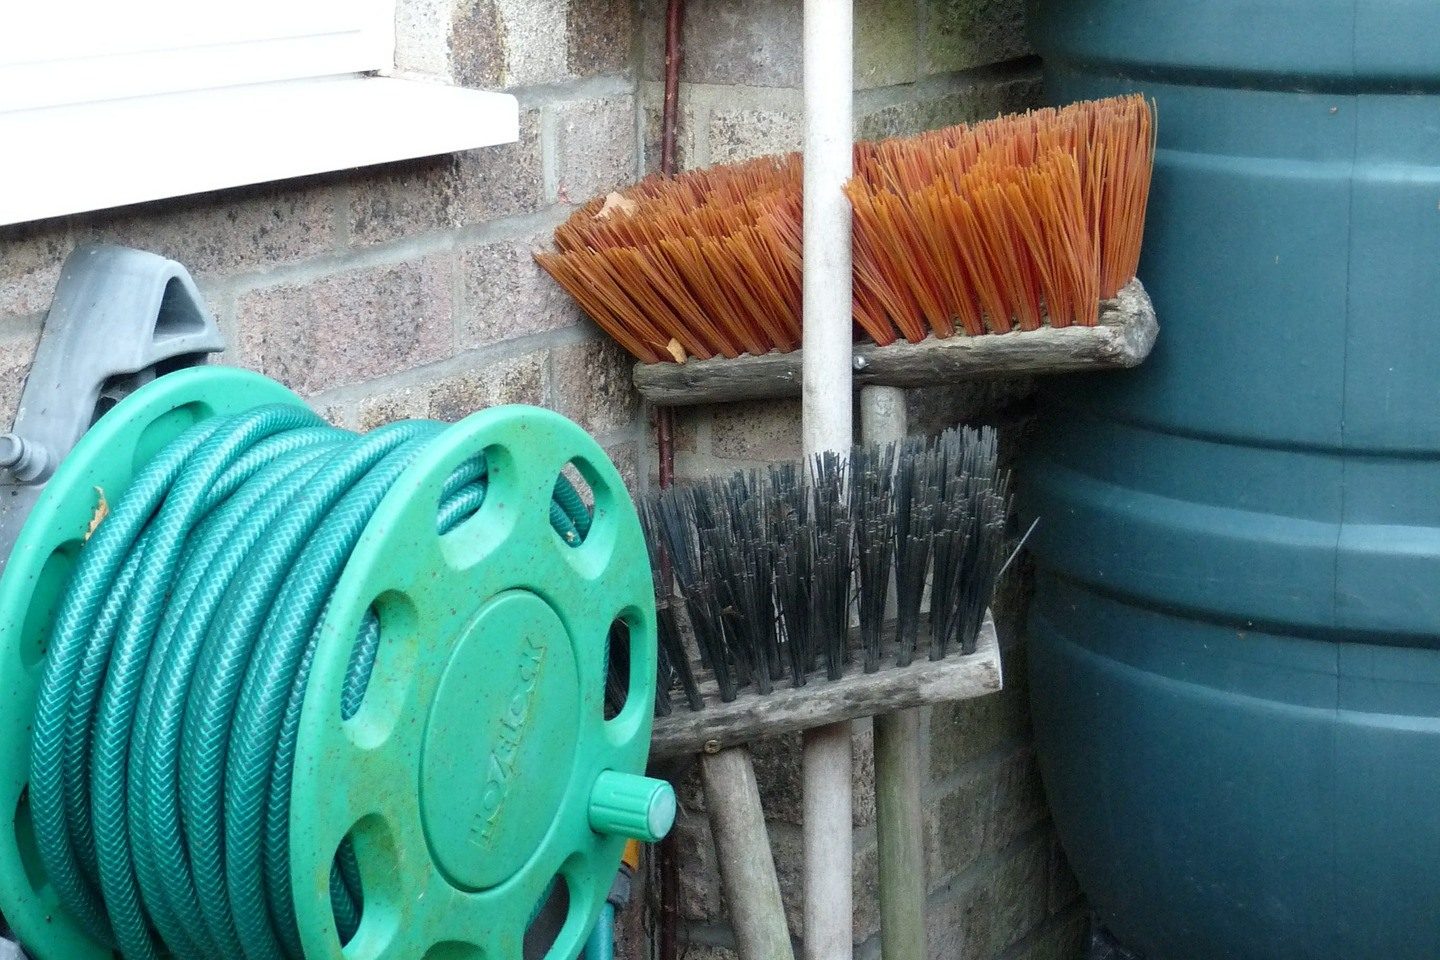 A garden hose together with water butt and brooms